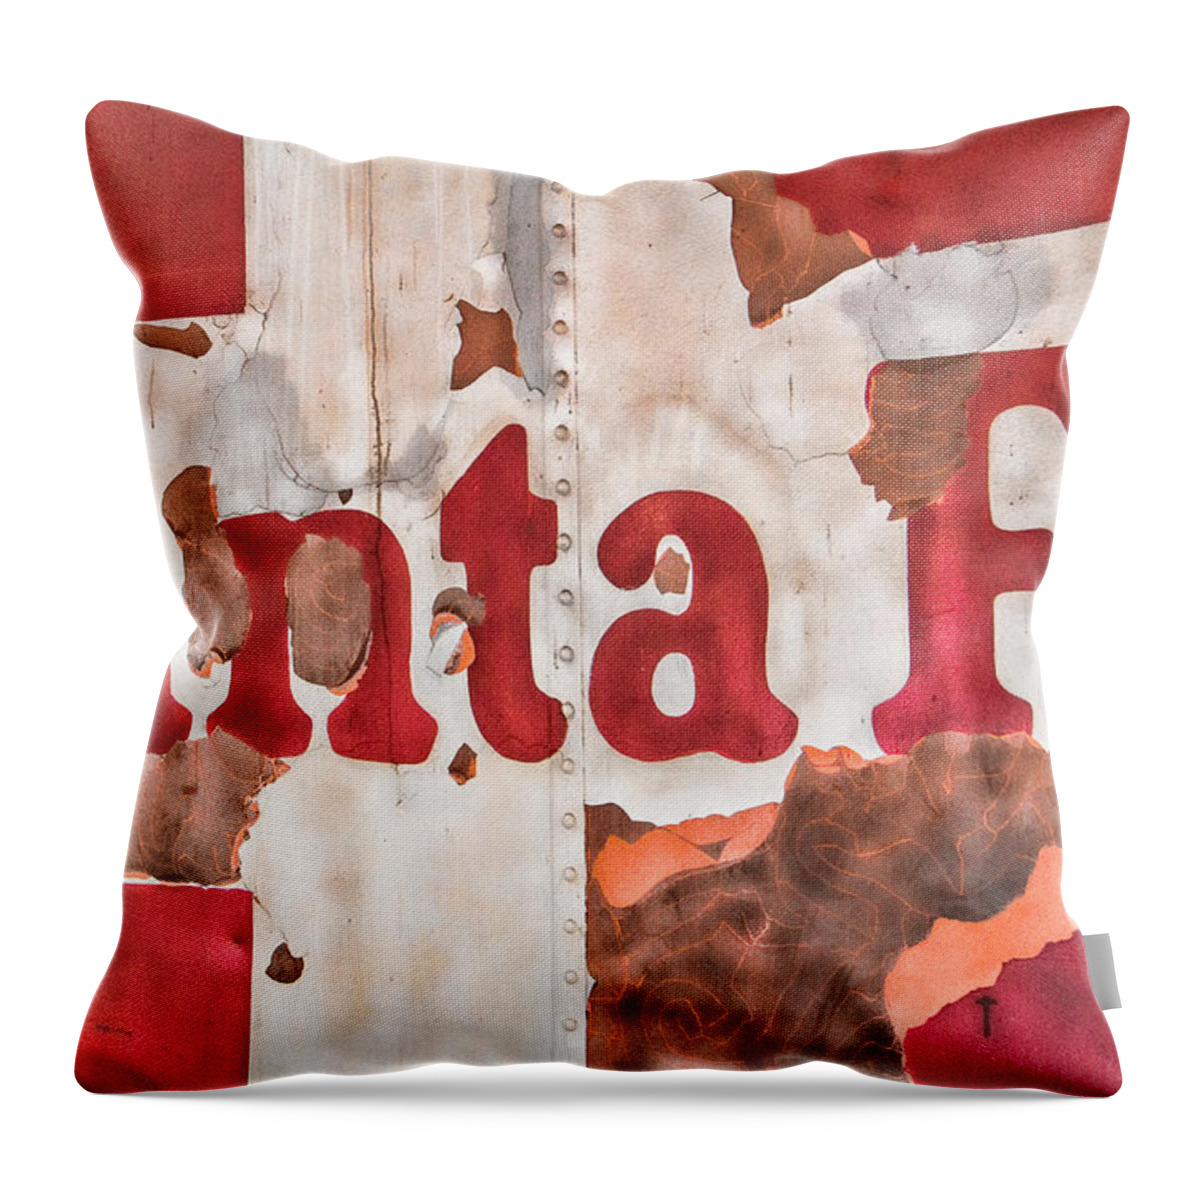 Santa Fe Vintage Railroad Sign Throw Pillow For Sale By Steven Bateson